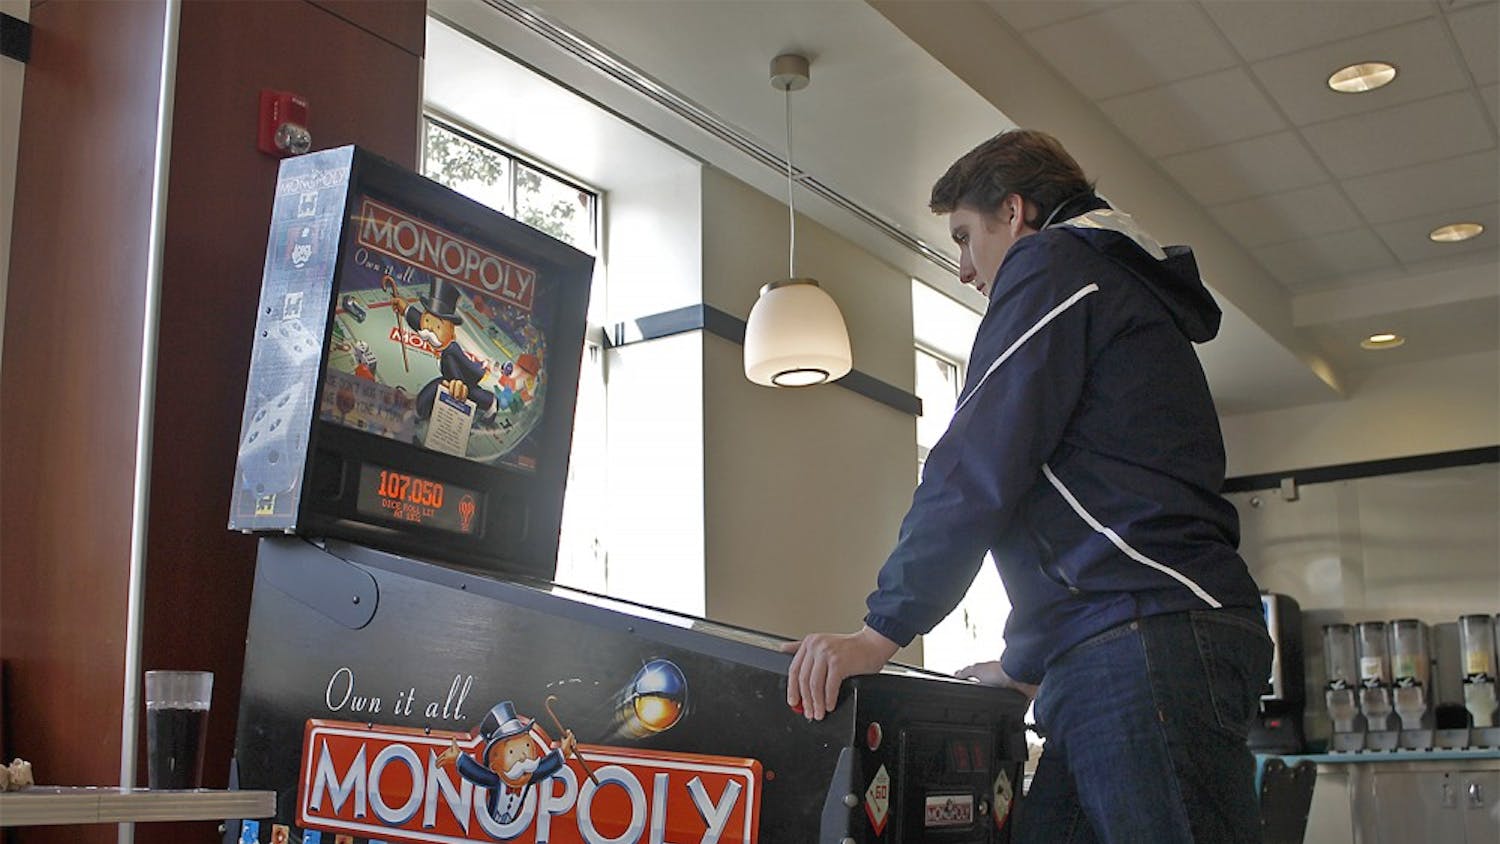 Conor Whitlark, a freshman from Greenville, NC enjoyed a game of Monopoly pinball in the Rams Head dining hall on Thursday afternoon.  Although he said he is better at the Galaxy arcade game, his favorite is the pin ball machine.